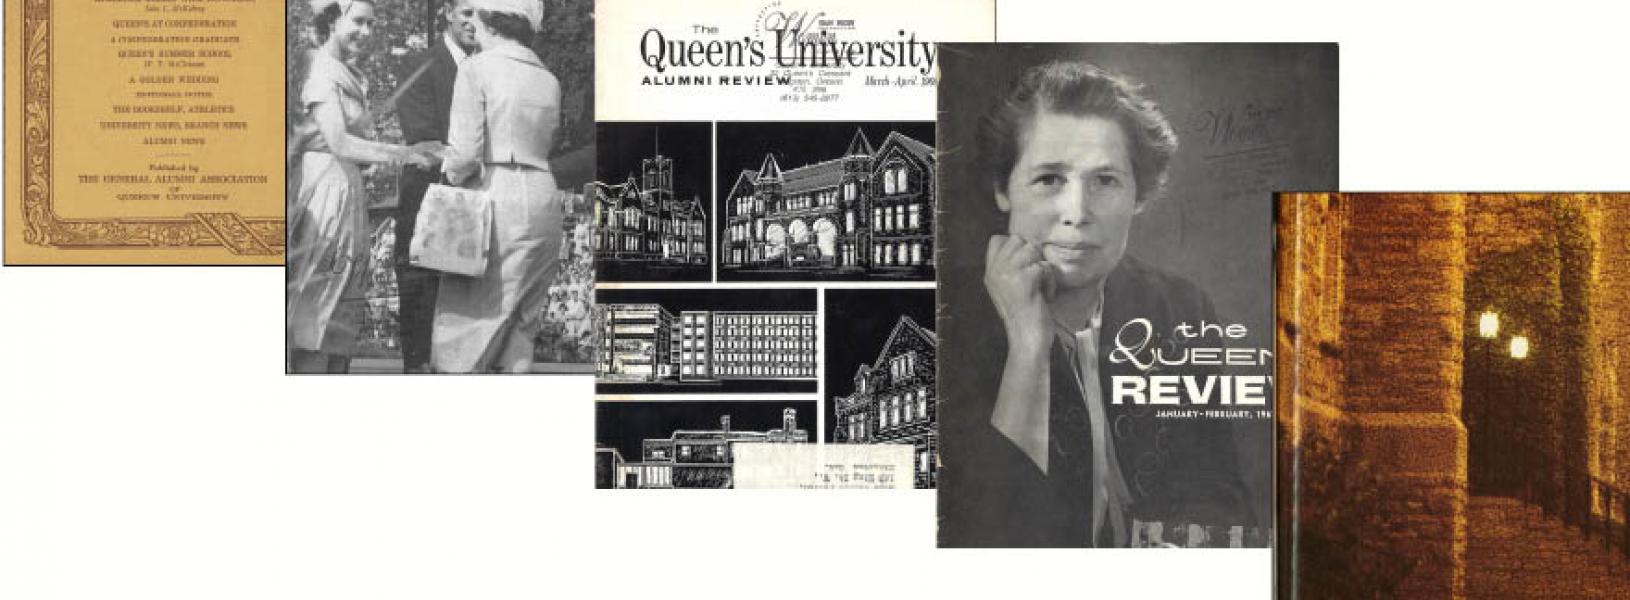 Covers of Queen's Alumni Review magazine throughout the years of publication.